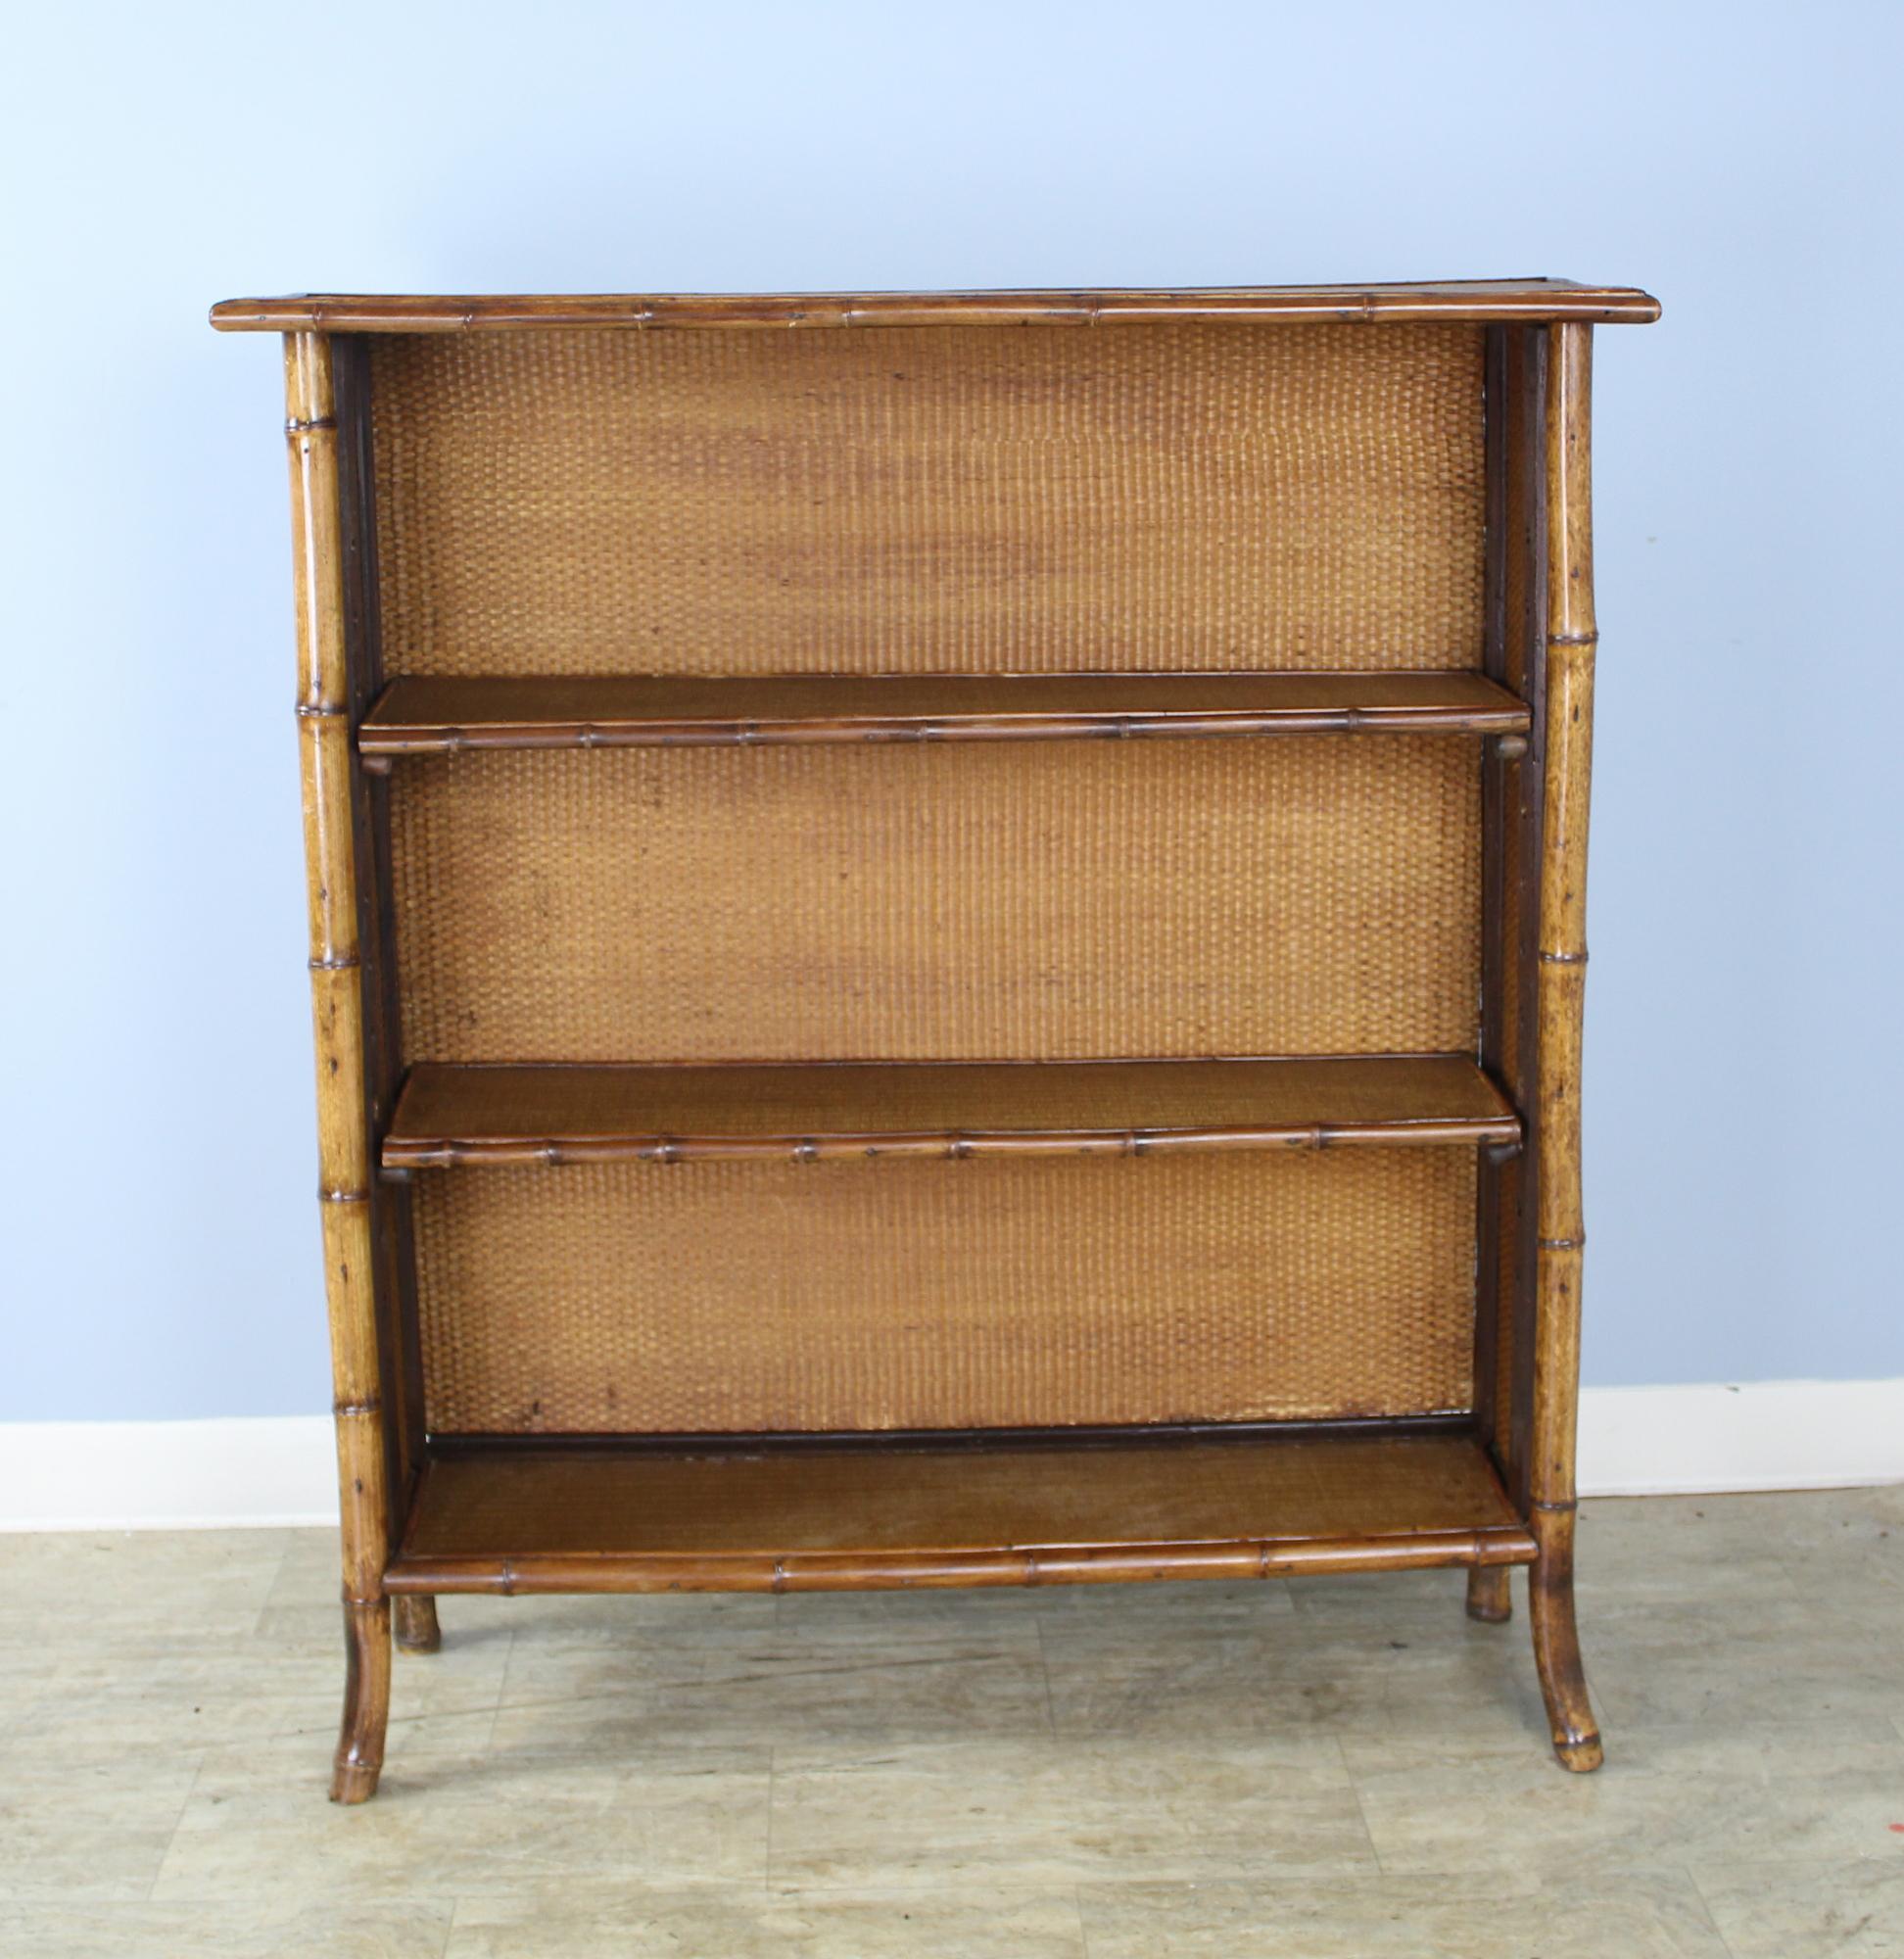 A sleek bamboo and rattan bookcase with adjustable shelves and flared front legs. The rattan is in good antique condition, with small area of wear near the bottom, shown in image #11. Pressed leather sides with floral motif are also in good